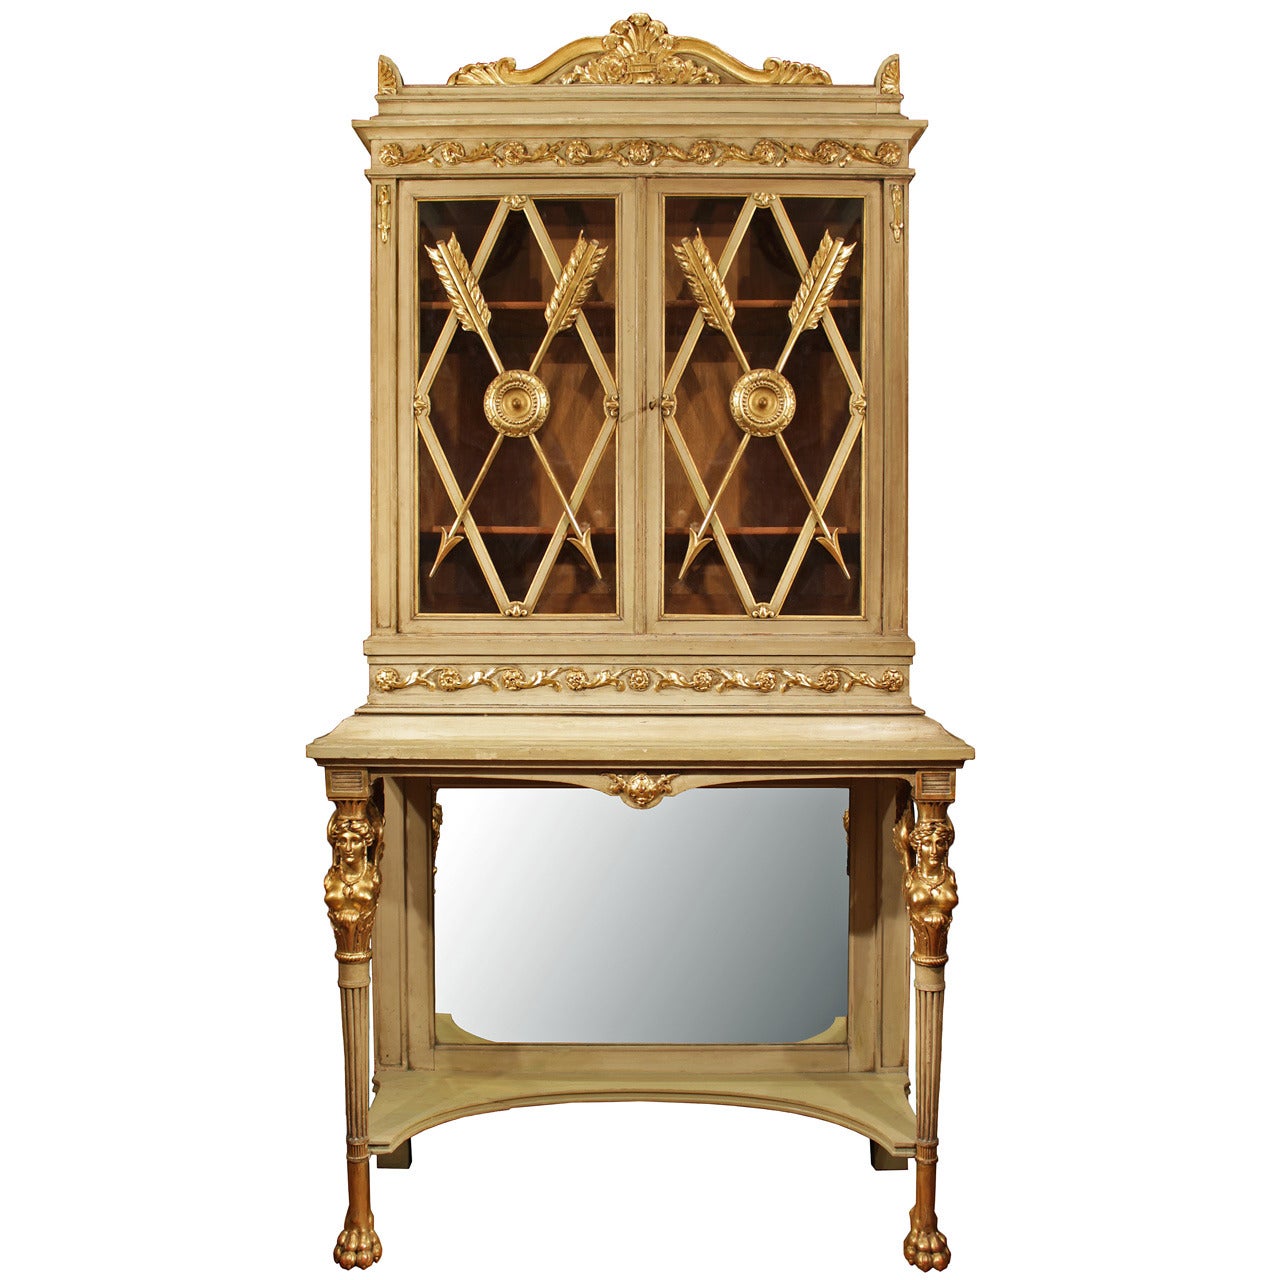  Italian 19th Century Neoclassical, Patinated and Giltwood Vitrine